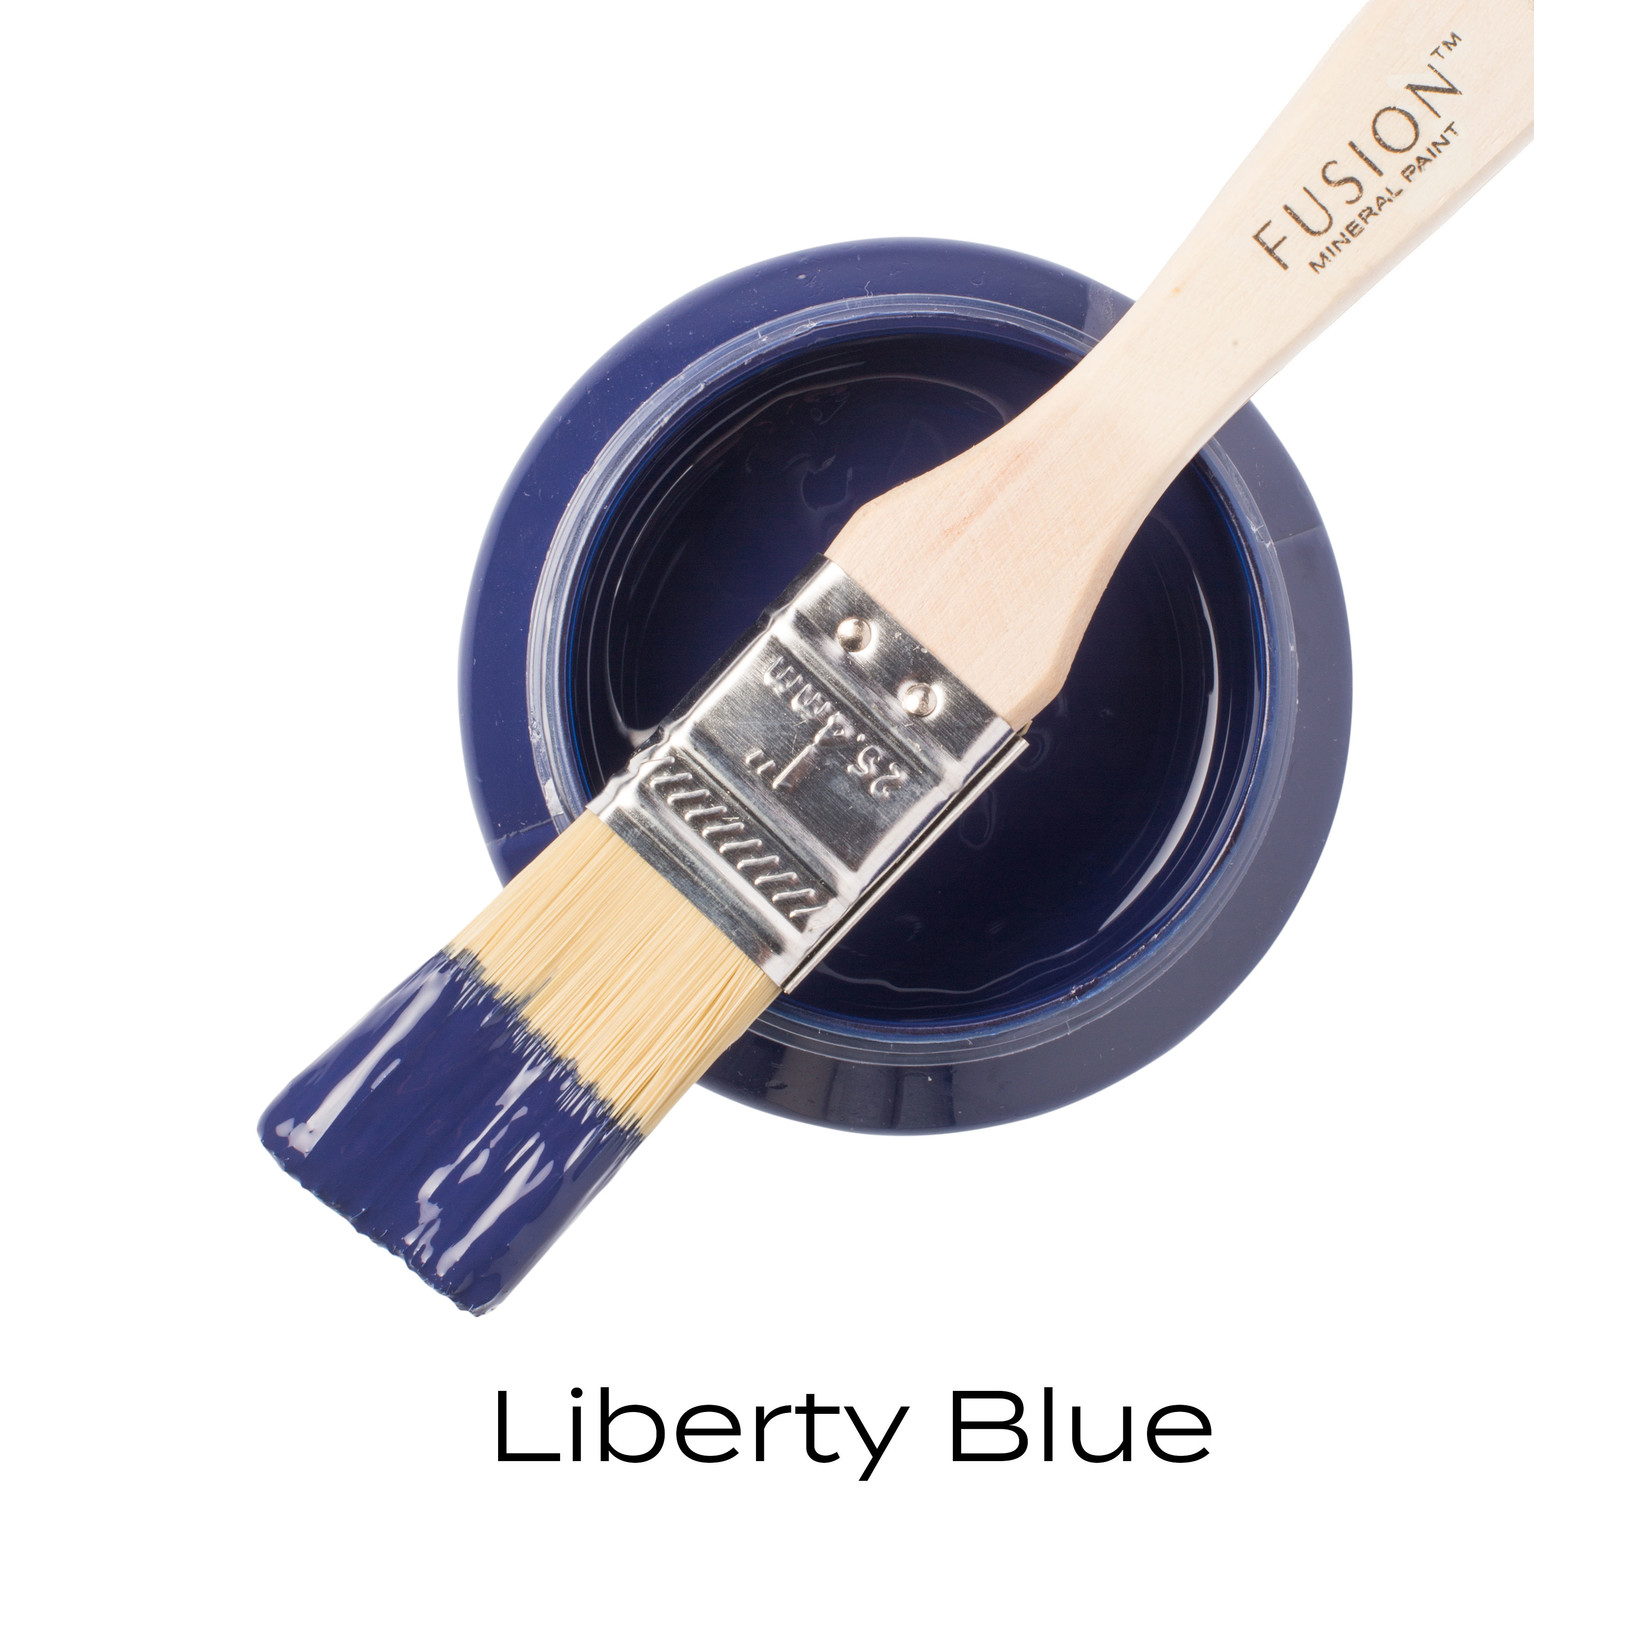 Fusion Mineral Paint™ - Liberty Blue